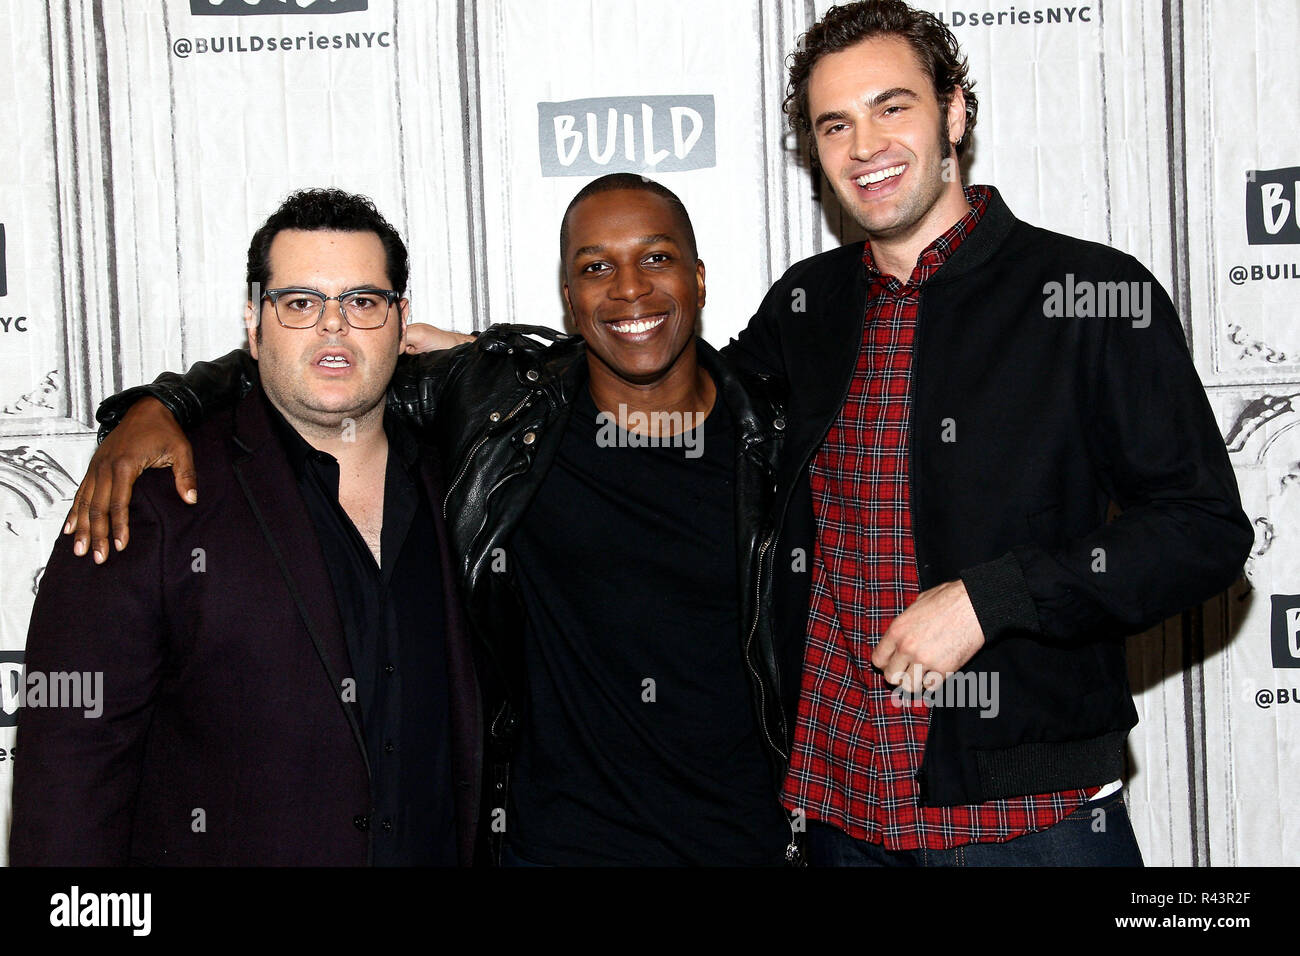 NEW YORK, NY - NOVEMBER 06:  Build presents Josh Gad, Leslie Odom Jr. and Tom Bateman discussing 'Murder On The Orient Express' at Build Studio on November 6, 2017 in New York City.  (Photo by Steve Mack/S.D. Mack Pictures) Stock Photo